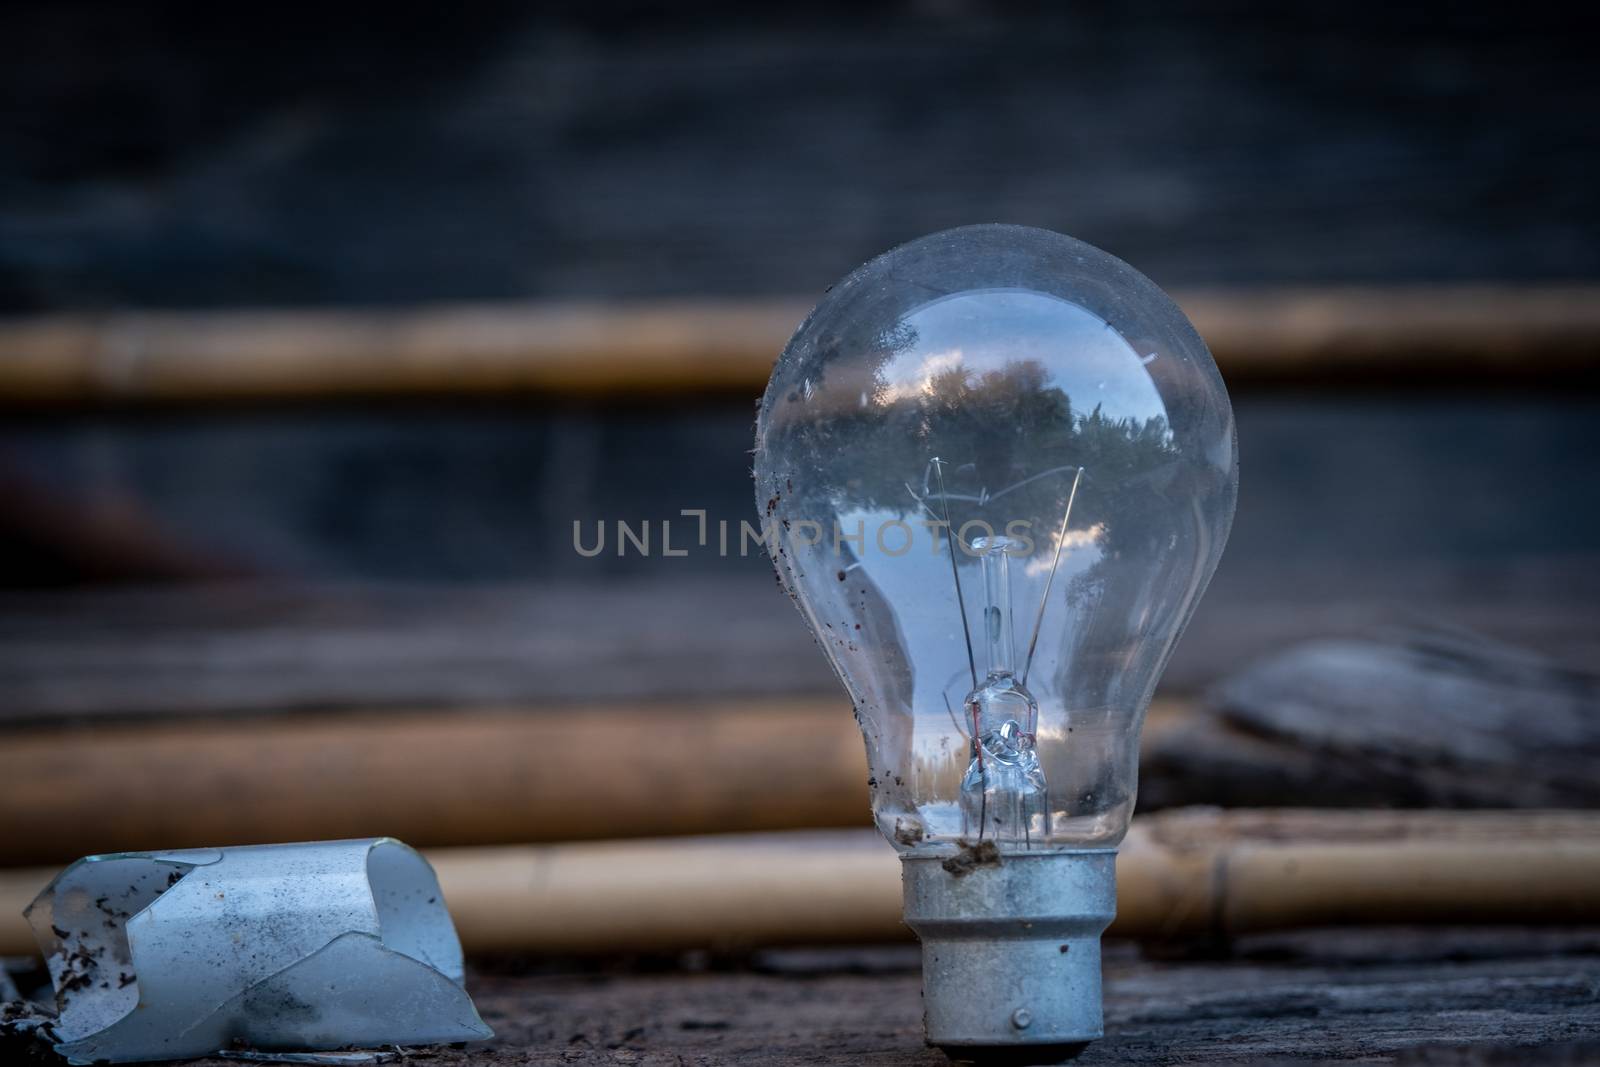 A Dirty Old and unused Light Bulb with blur background